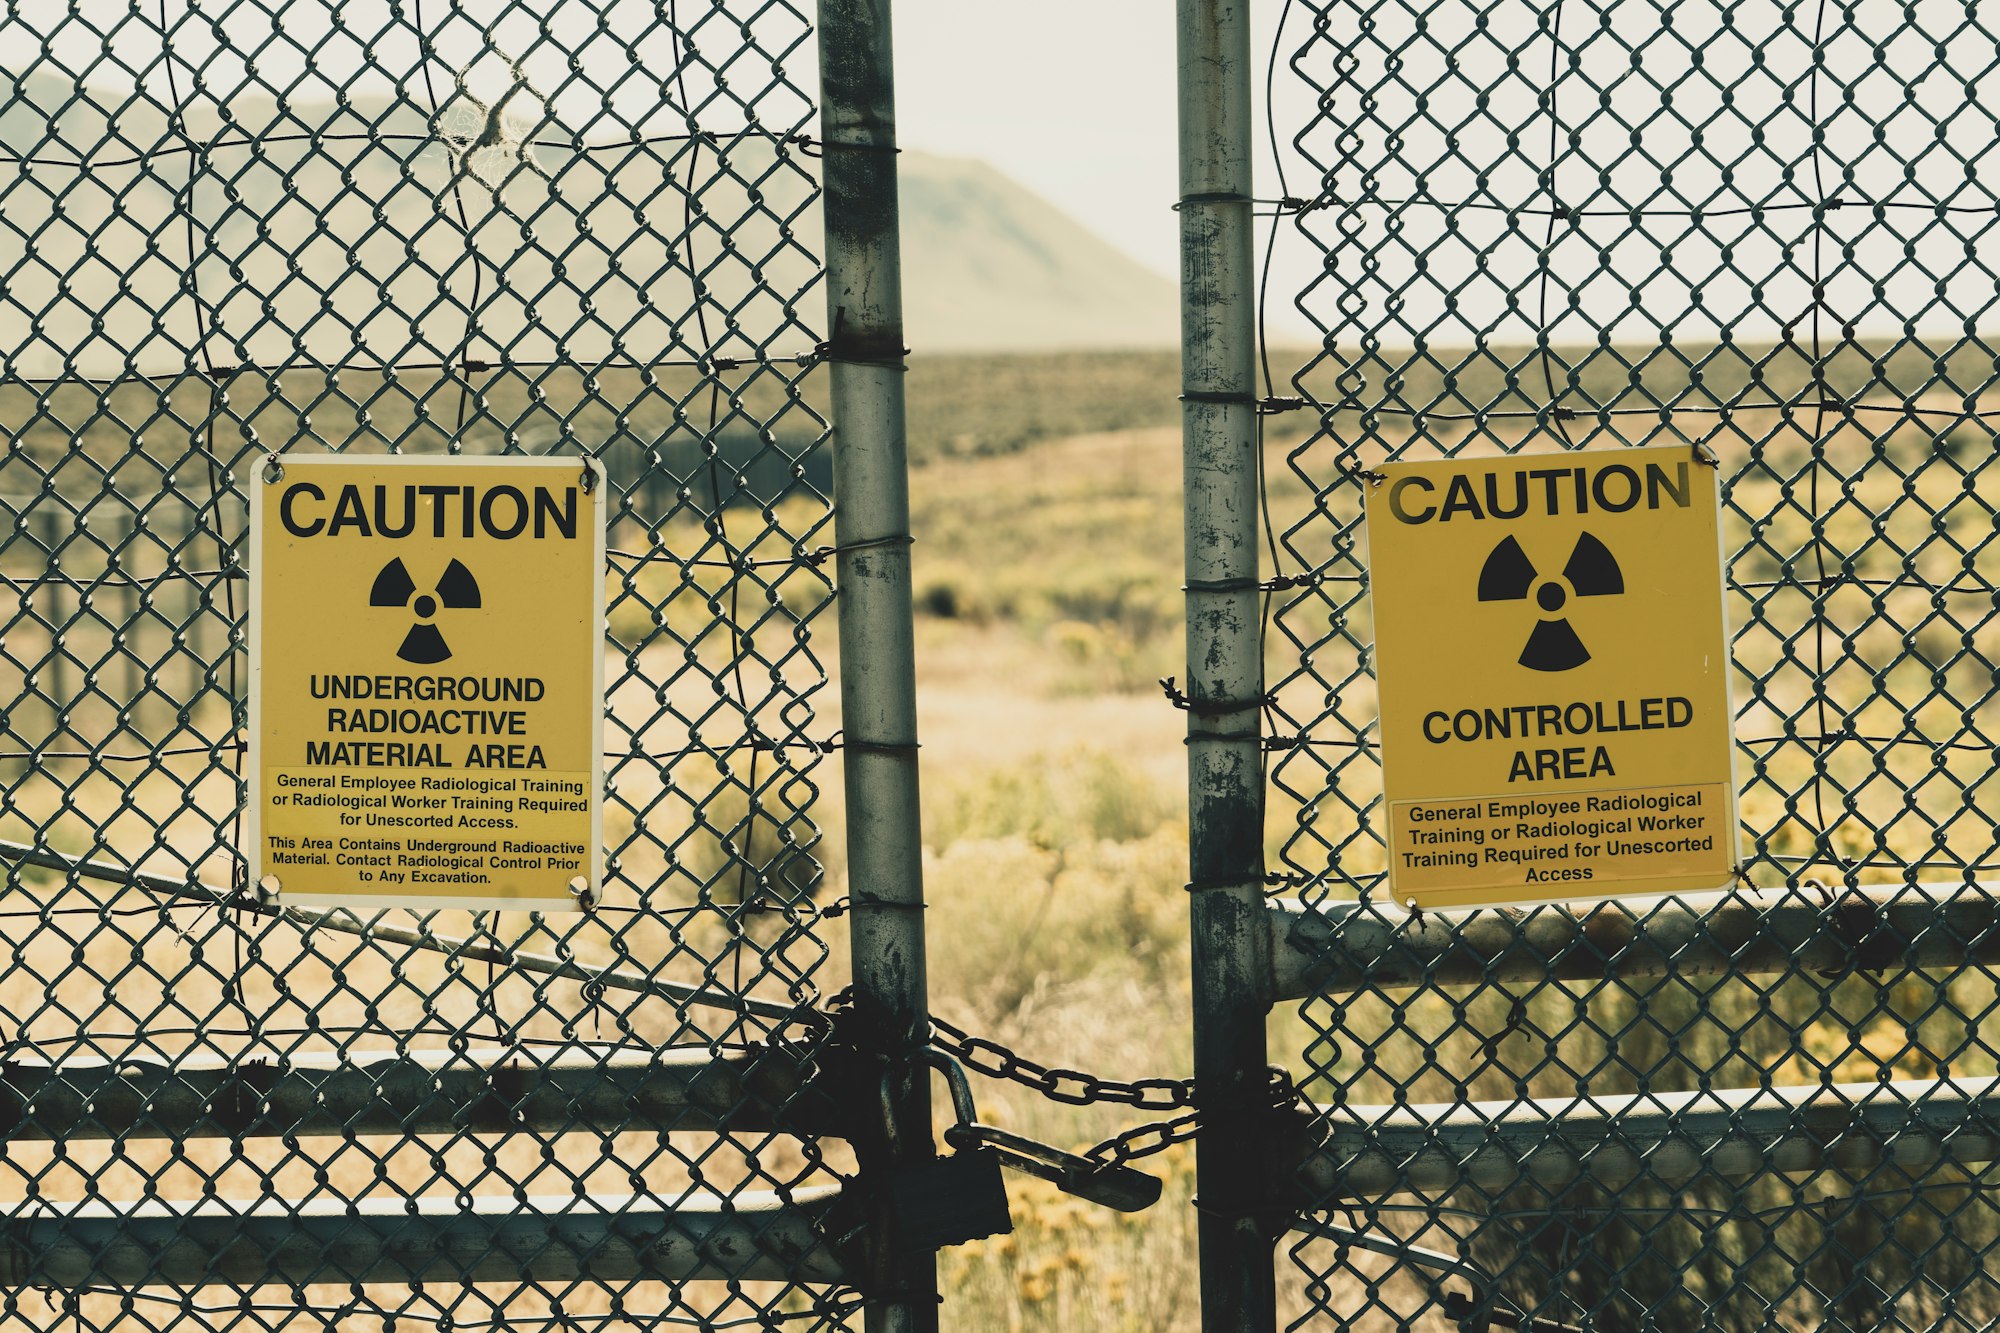 I had to drive through Idaho and decided to take a back road. That's when I came across this fence with many radiation warning signs. Naturally, I took a picture. 